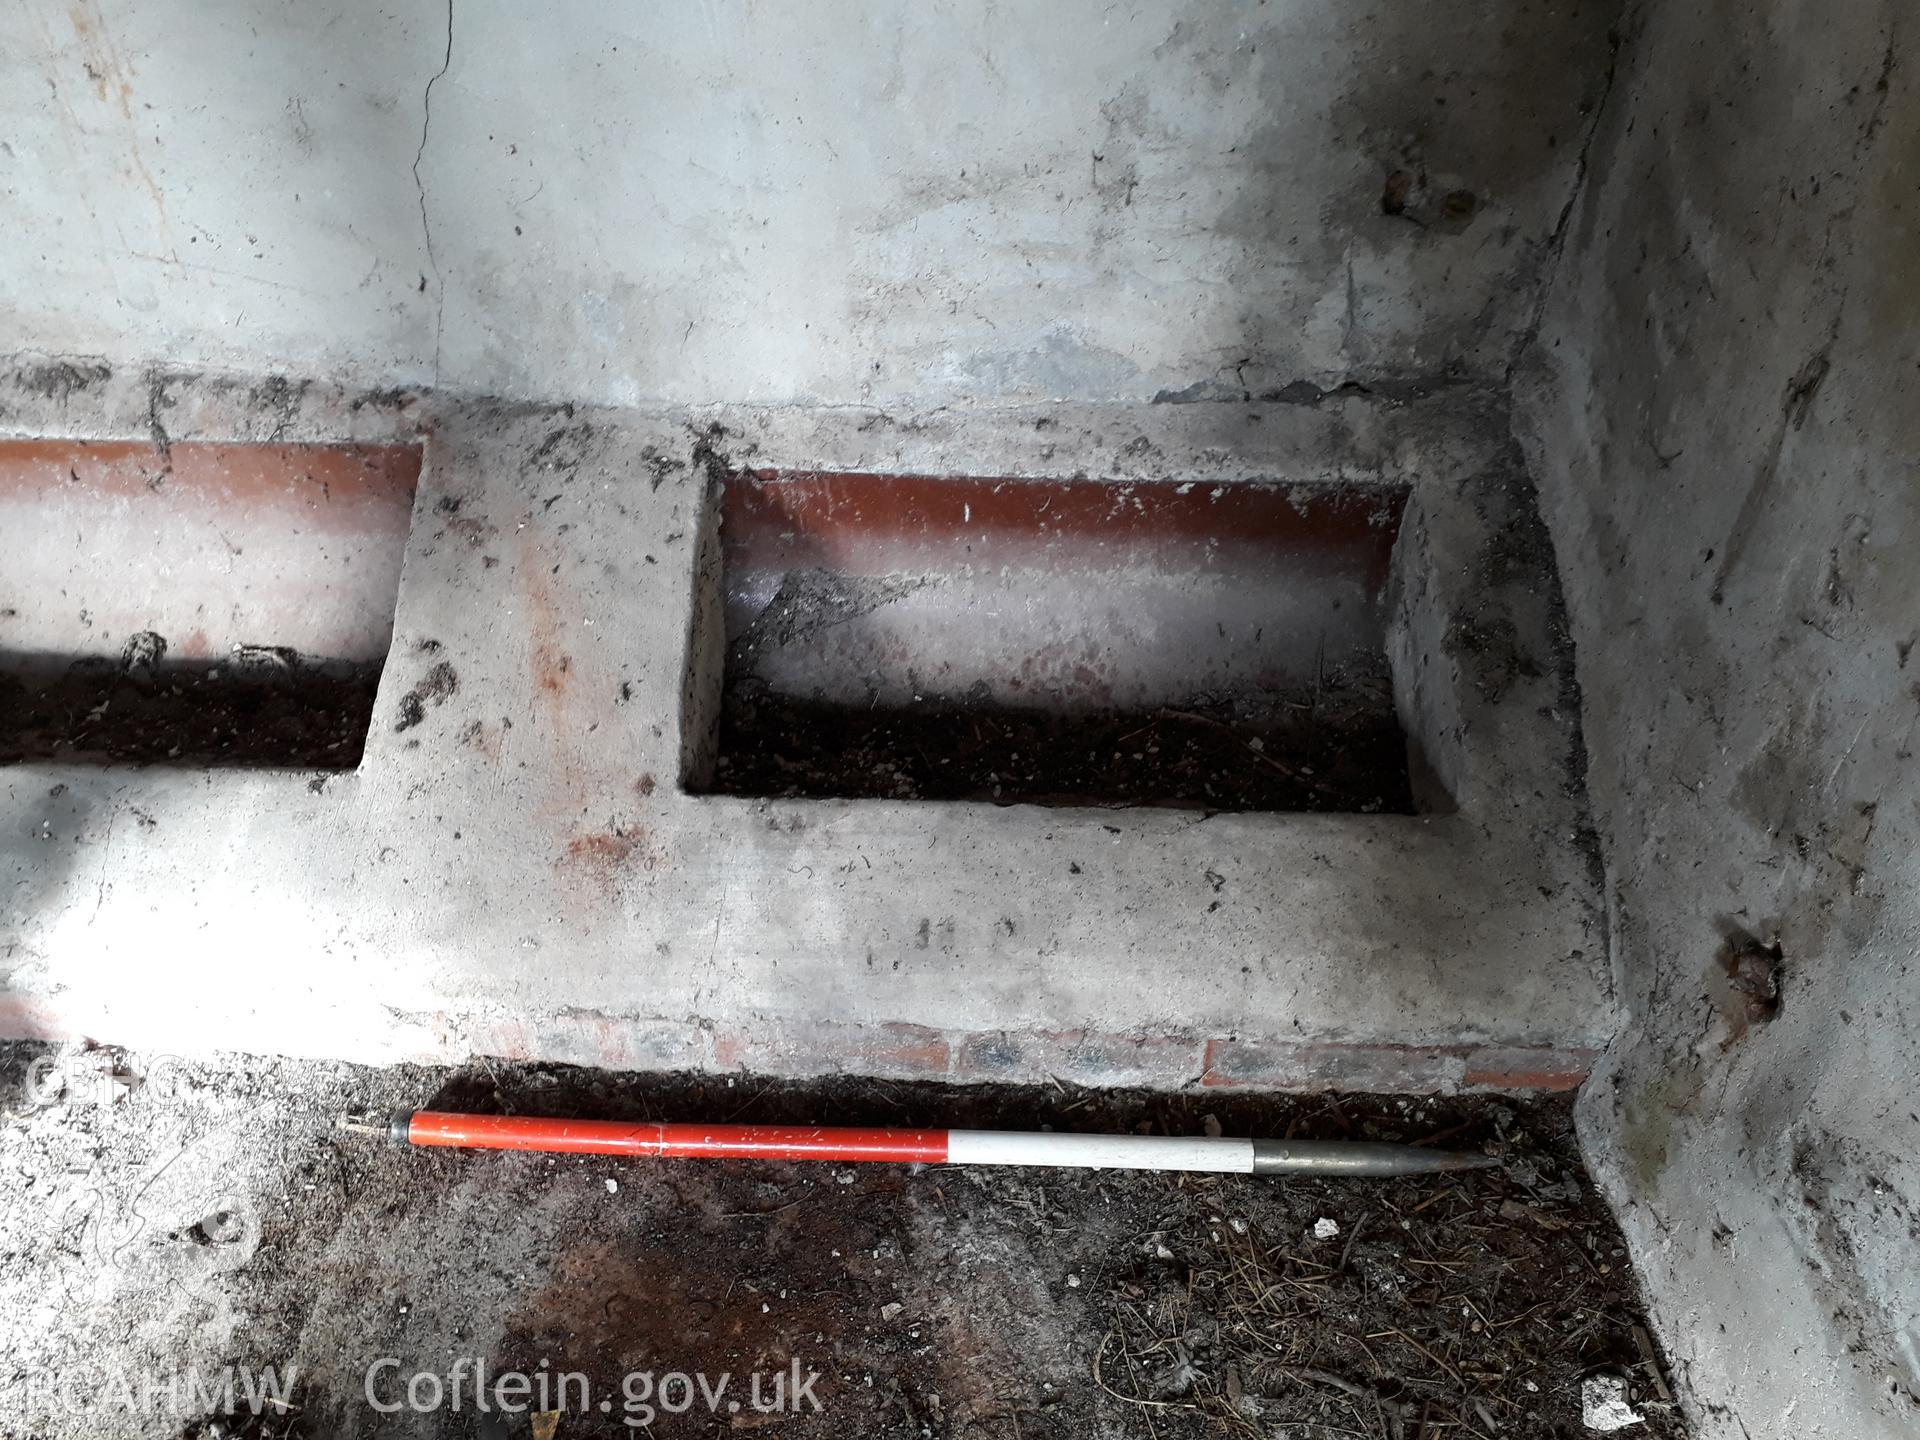 Barn interior animal trough detail, view north-west. 1m scale. Photographed as part of archaeological building recording conducted at Bryn Ysguboriau, Llanelidan, Denbighshire, carried out by Archaeology Wales, 2018. Project no. P2587.